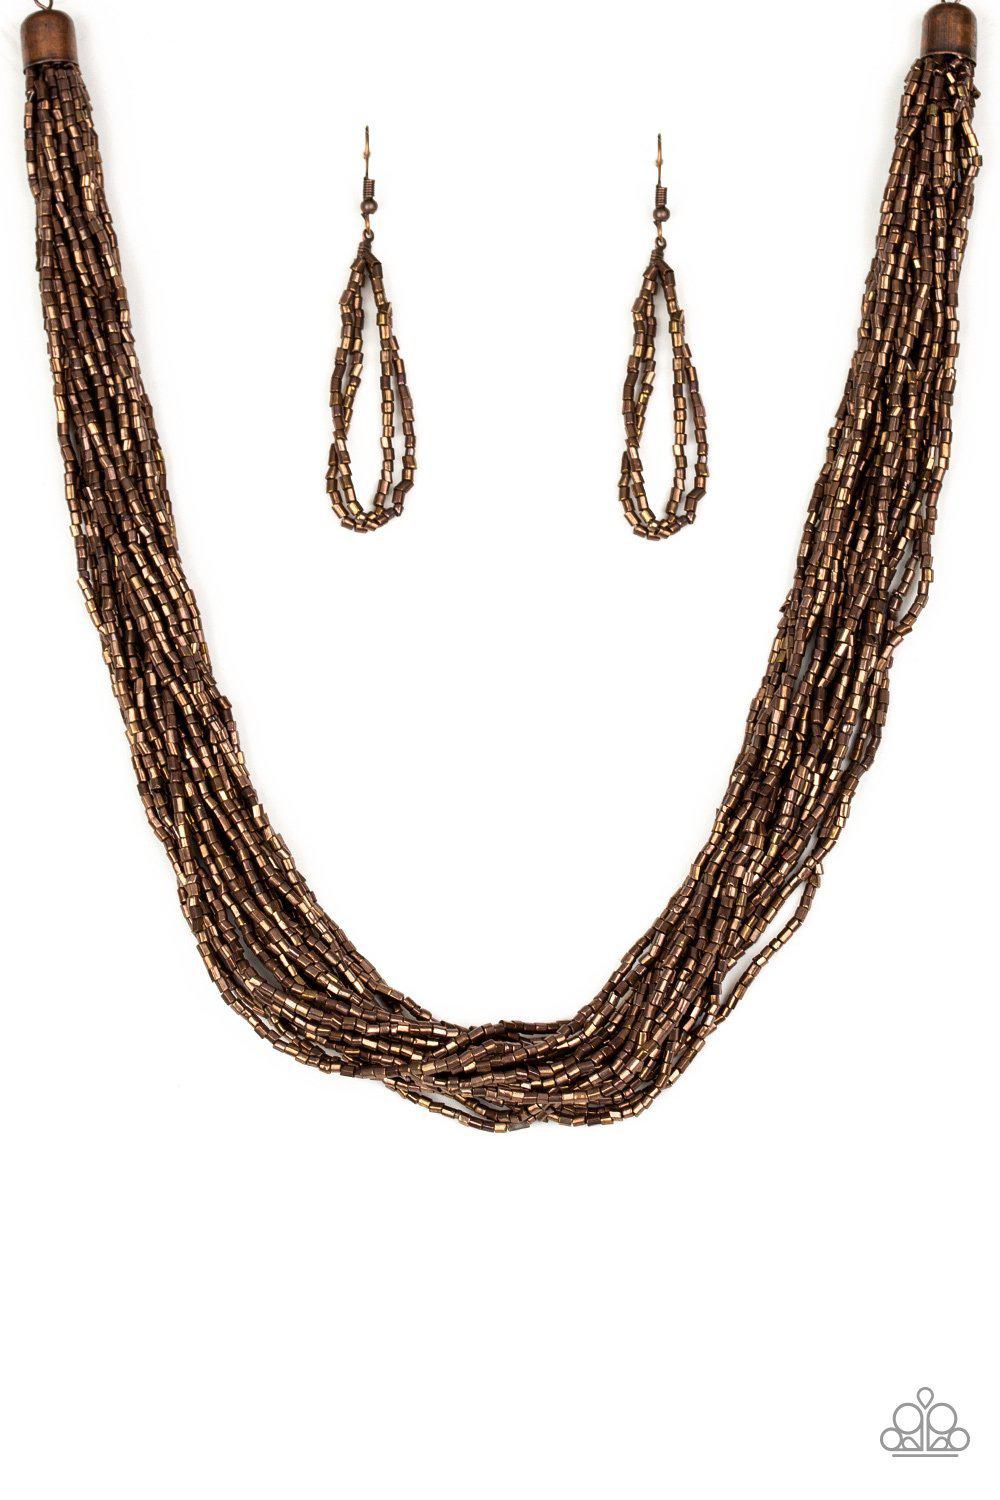 The Speed of STARLIGHT Copper Seed Bead Necklace and matching Earrings - Paparazzi Accessories-CarasShop.com - $5 Jewelry by Cara Jewels